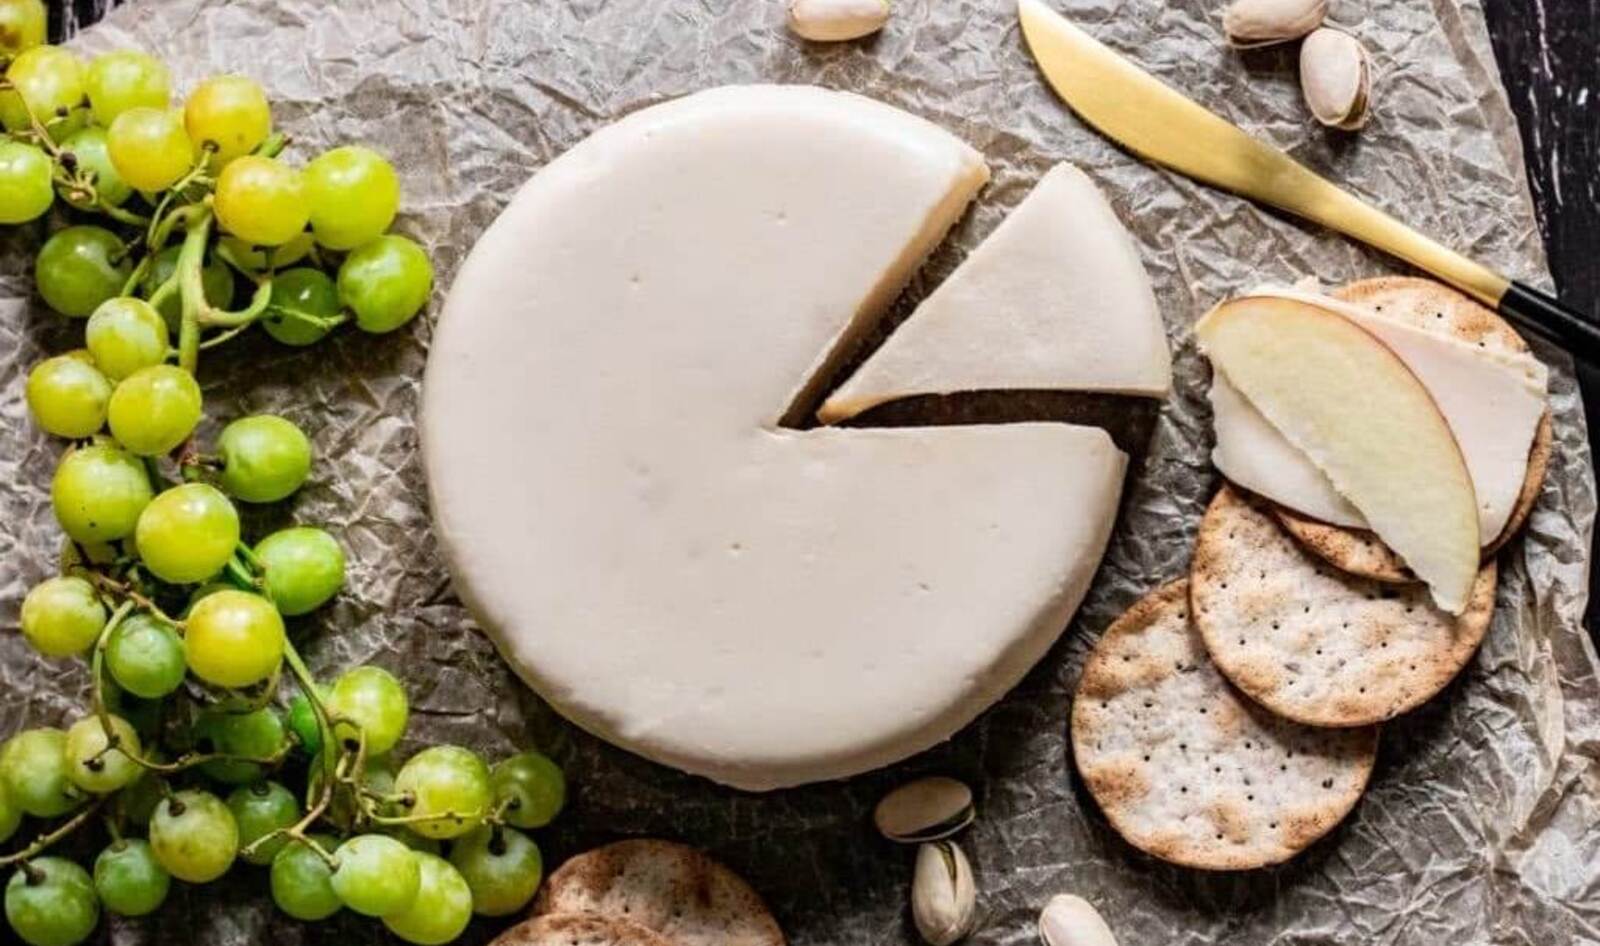 5 Easy Tips and Recipes to Make Nut-Free, Dairy-Free Cheese at Home